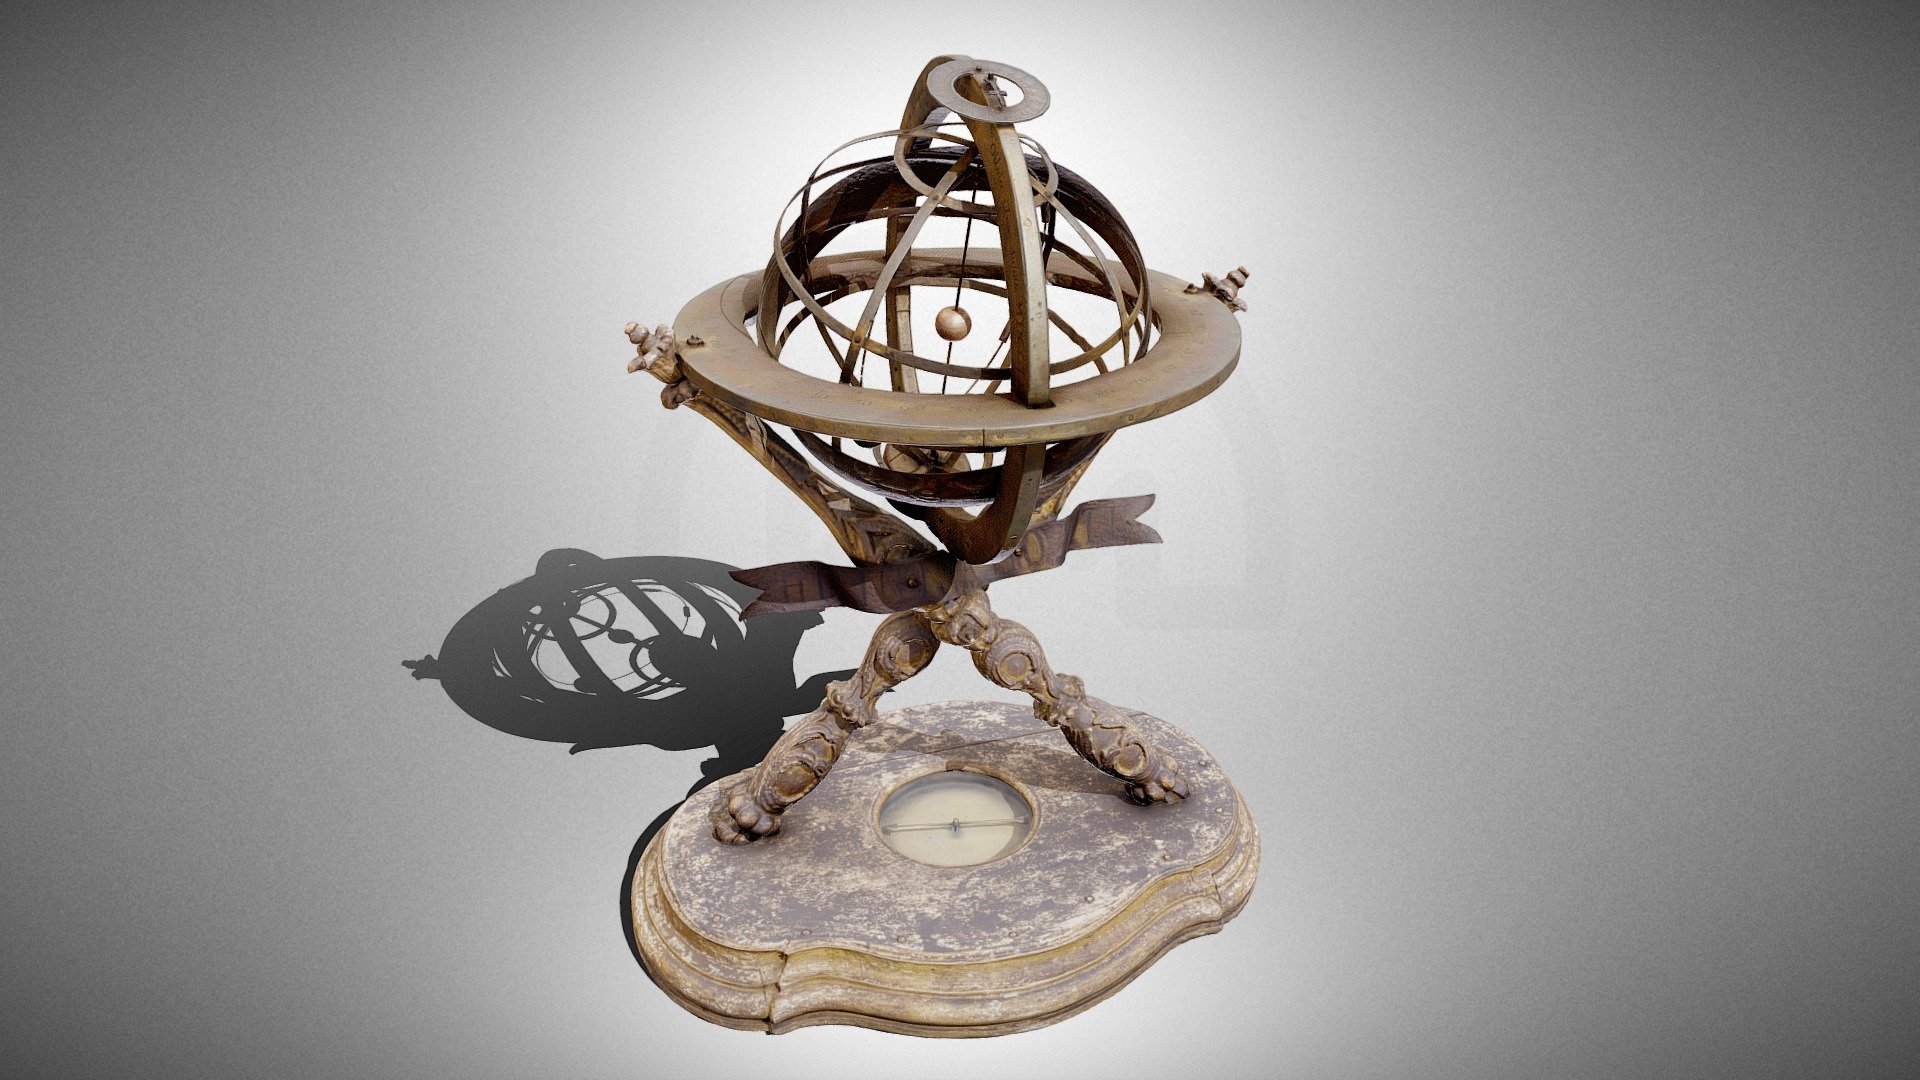 Full name: Armillary sphere by Franciszek Słupski (1771)

An armillary sphere is an astronomical instrument, a model of the celestial sphere. It was used to demonstrate celestial phenomena and determine the time and equatorial and ecliptic coordinates. The armillary sphere enabled simulation of astronomical phenomena, including the movement of planets in relation to the Sun. It was made by Franciszek Słupski as part of his doctoral thesis defended at the Philosophy Department of the University of Kraków.

For more images and further information, visit: https://muzea.malopolska.pl/en/objects-list/2792 

Inventory number: 4307; 307/V

Localisation of the physical object: Jagiellonian University Museum Collegium Maius, Kraków, Poland

Digitalisation: Regional Digitalisation Lab, Małopolska Institute of Culture in Kraków, Poland; “Virtual Museums of Małopolska” project - Armillary sphere (1771) - Download Free 3D model by Virtual Museums of Małopolska (@WirtualneMuzeaMalopolski) 3d model